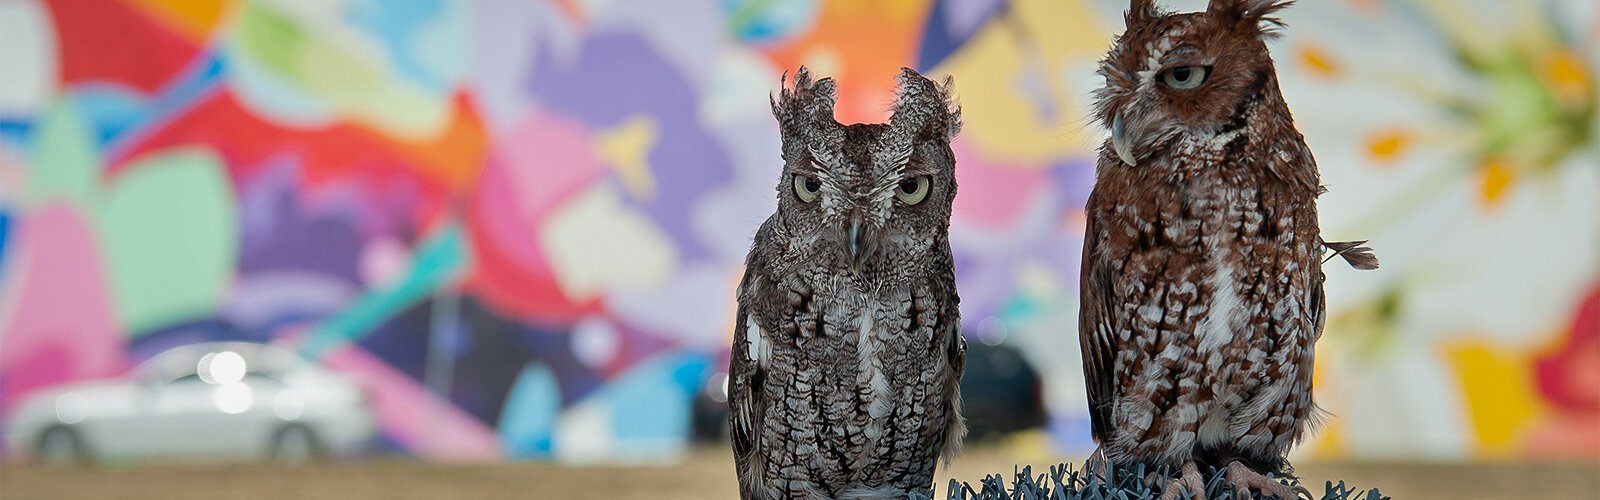 Two adult Eastern Screech Owls helped draw a crowd to the educational display at The Market Marie in Clearwater on Saturday. “McGough Nature Park at The Narrows” showed off the owls and other birds now under their care after a variety of injuries.